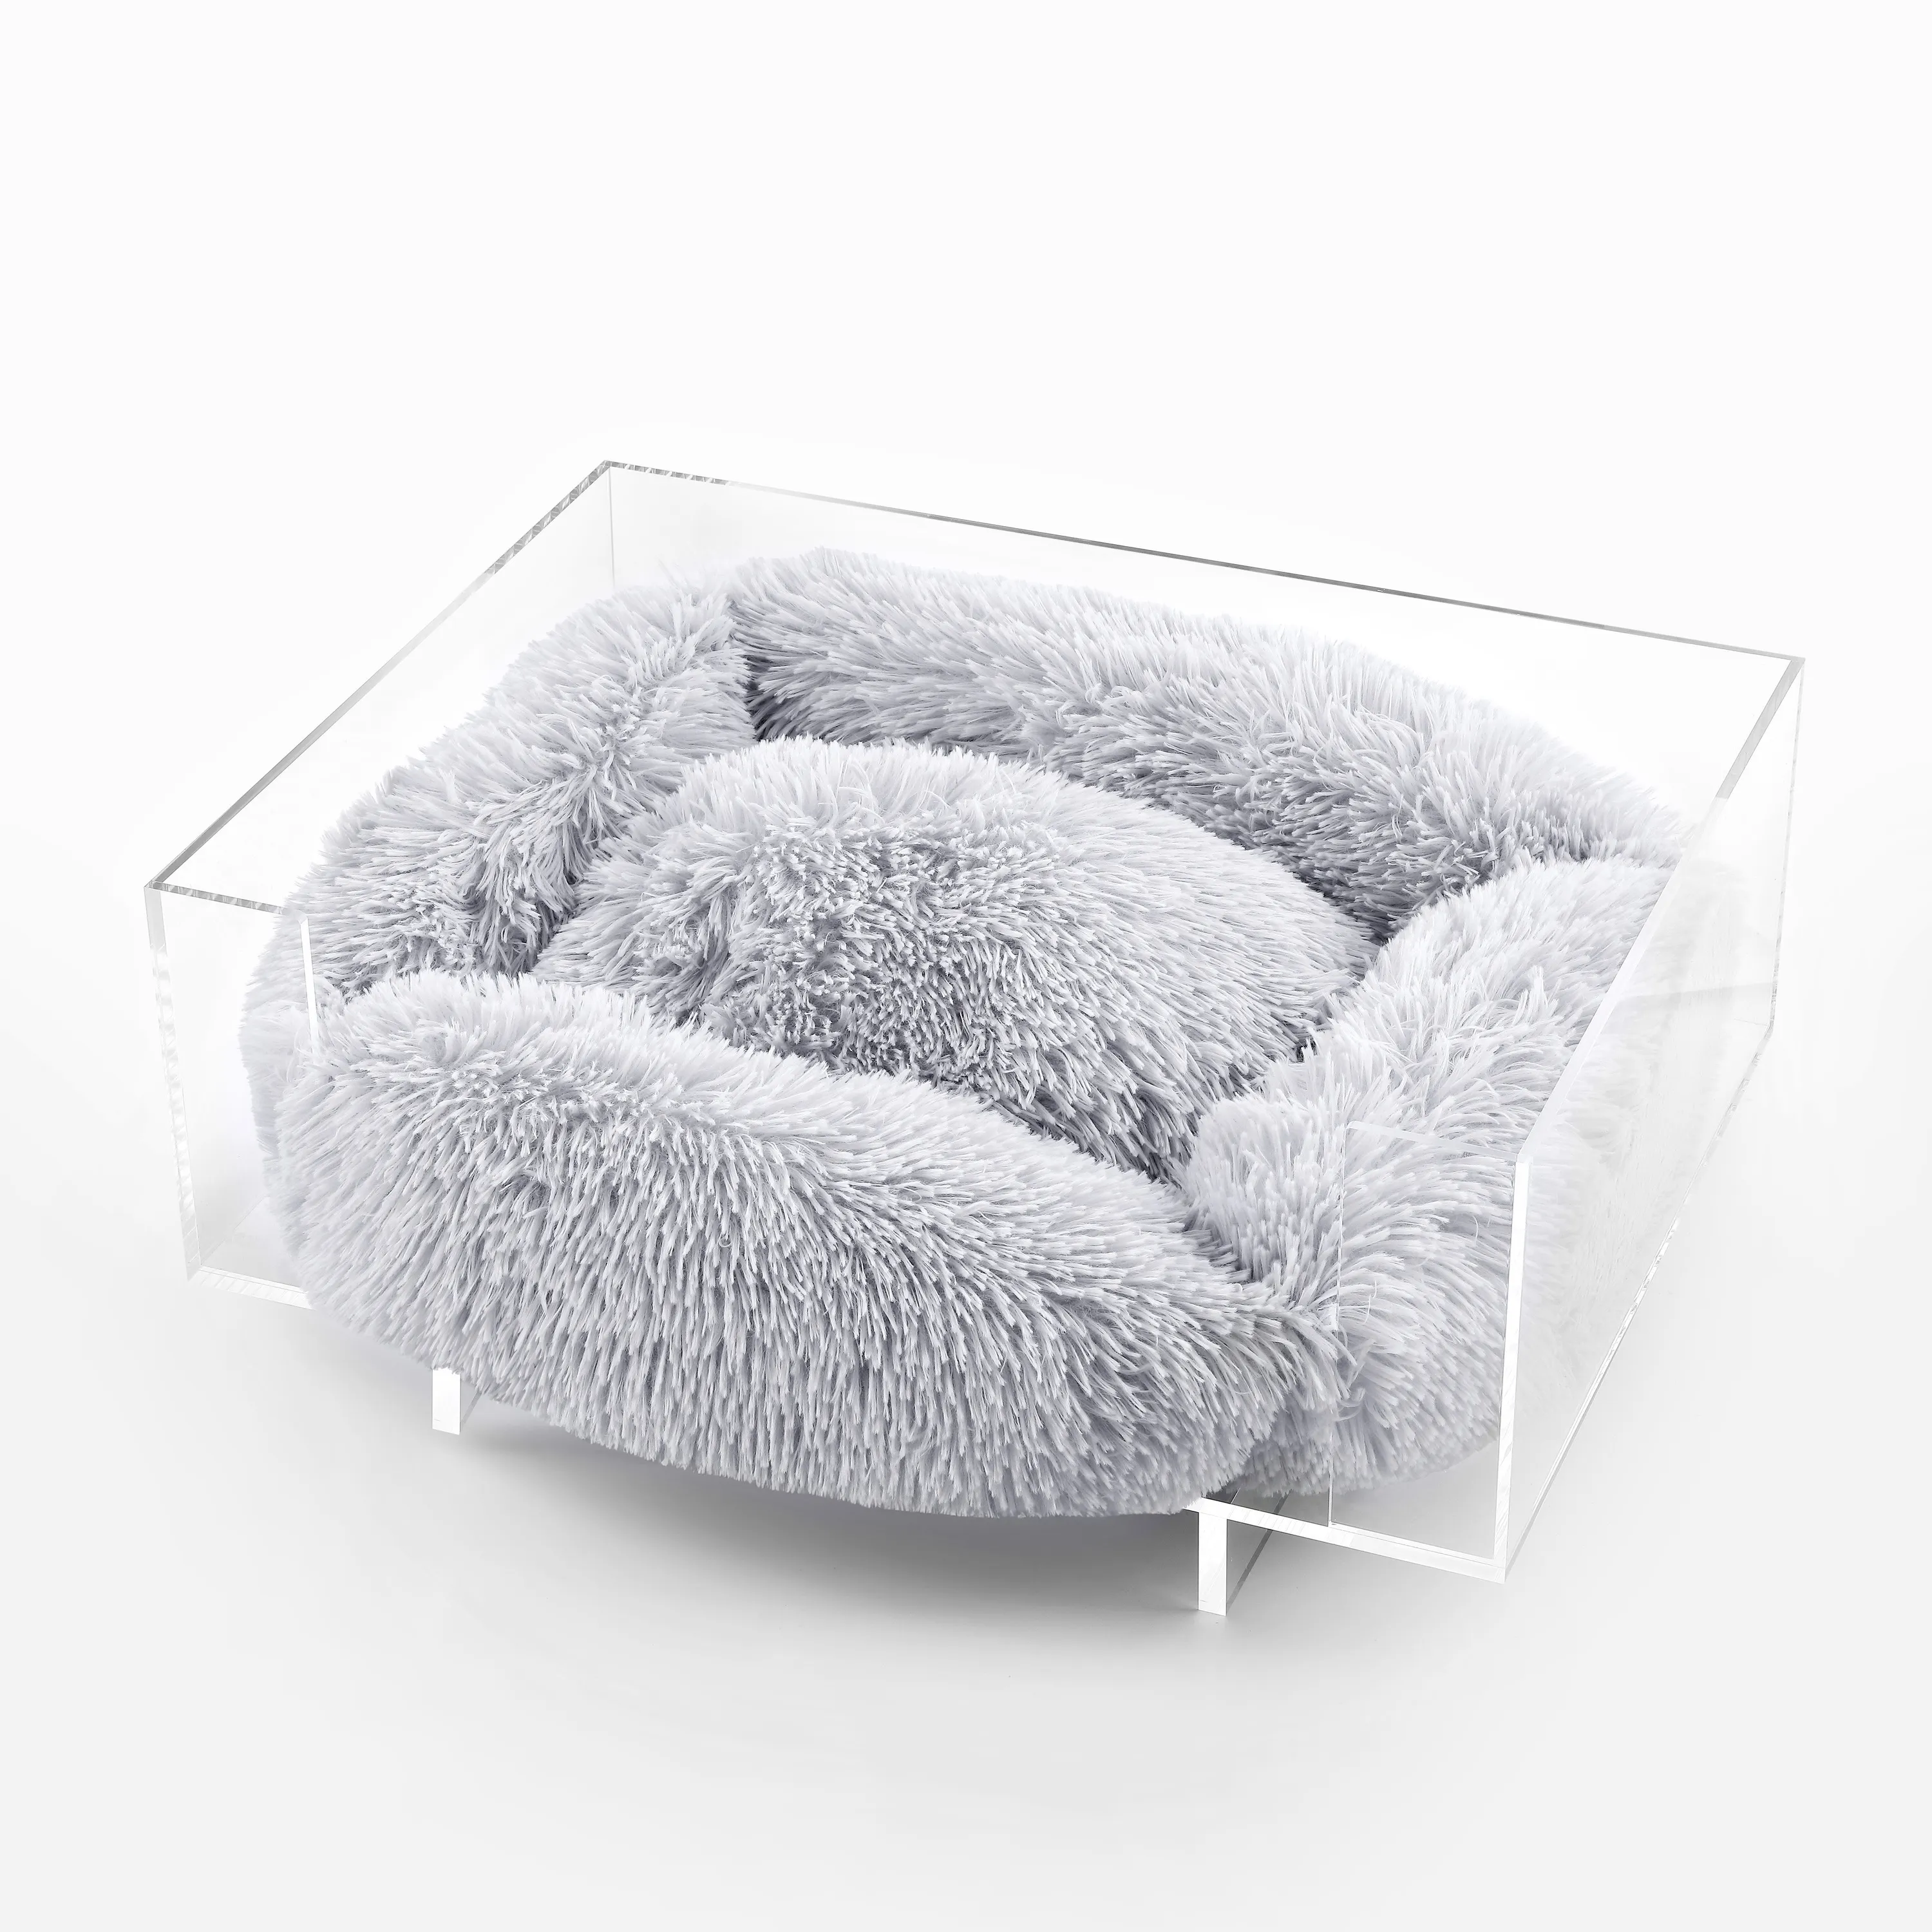 Carole Small/Medium Modern Lucite Calming Fluffy Pet Bed with Washable Cushion